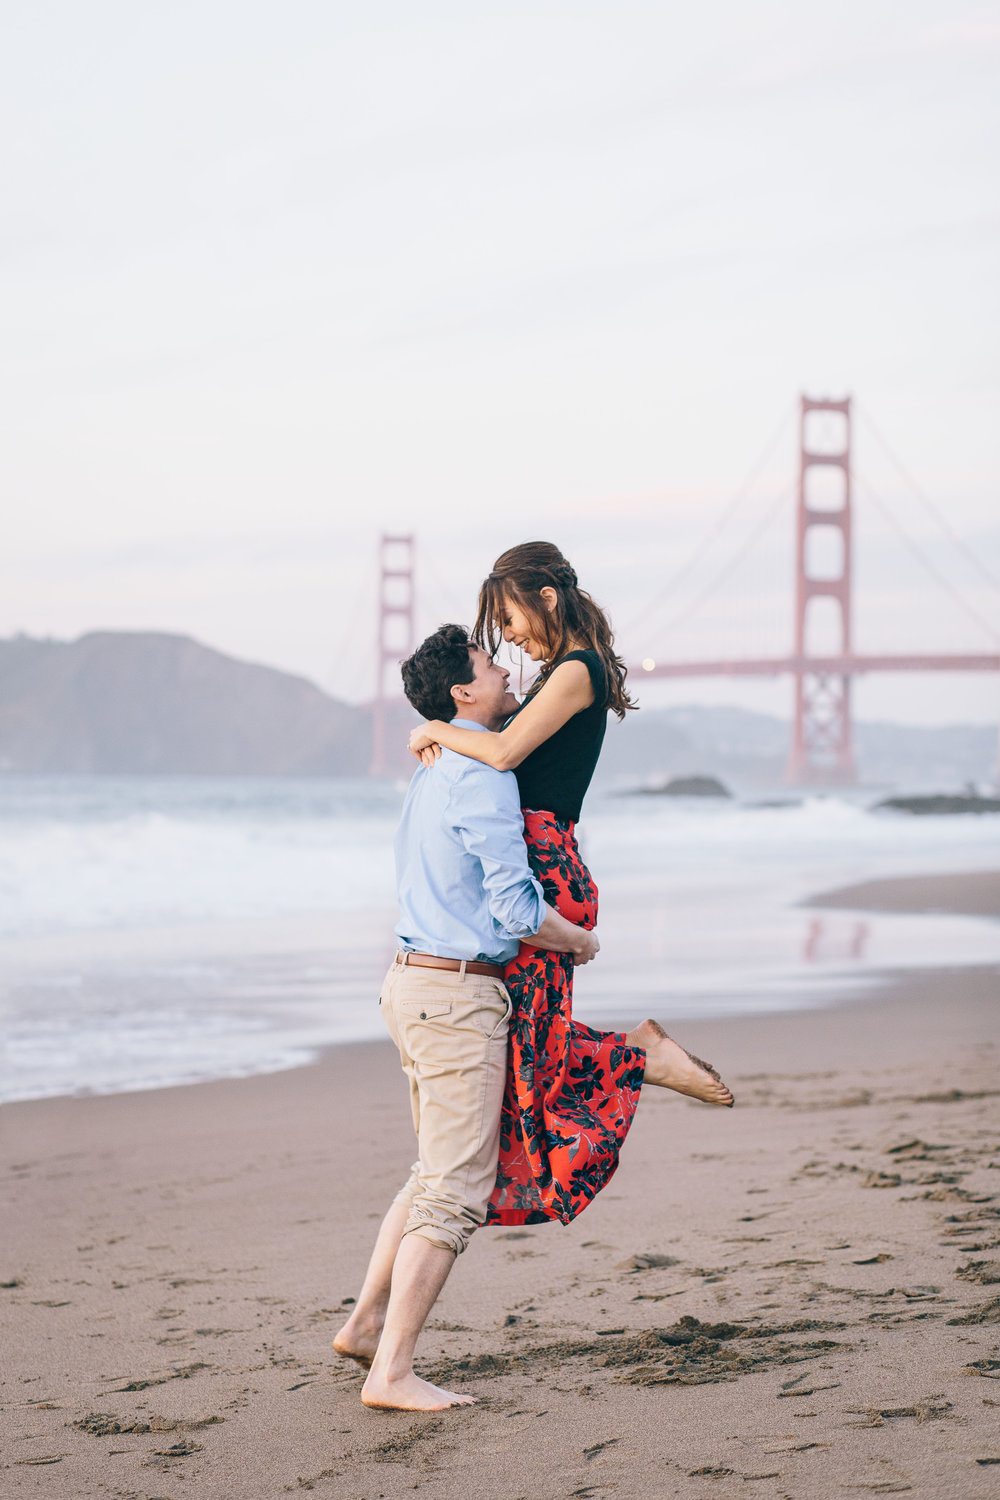 Best Engagement Photo Locations in San Francisco - Baker Beach Engagement Photos by JBJ Pictures (6).jpg